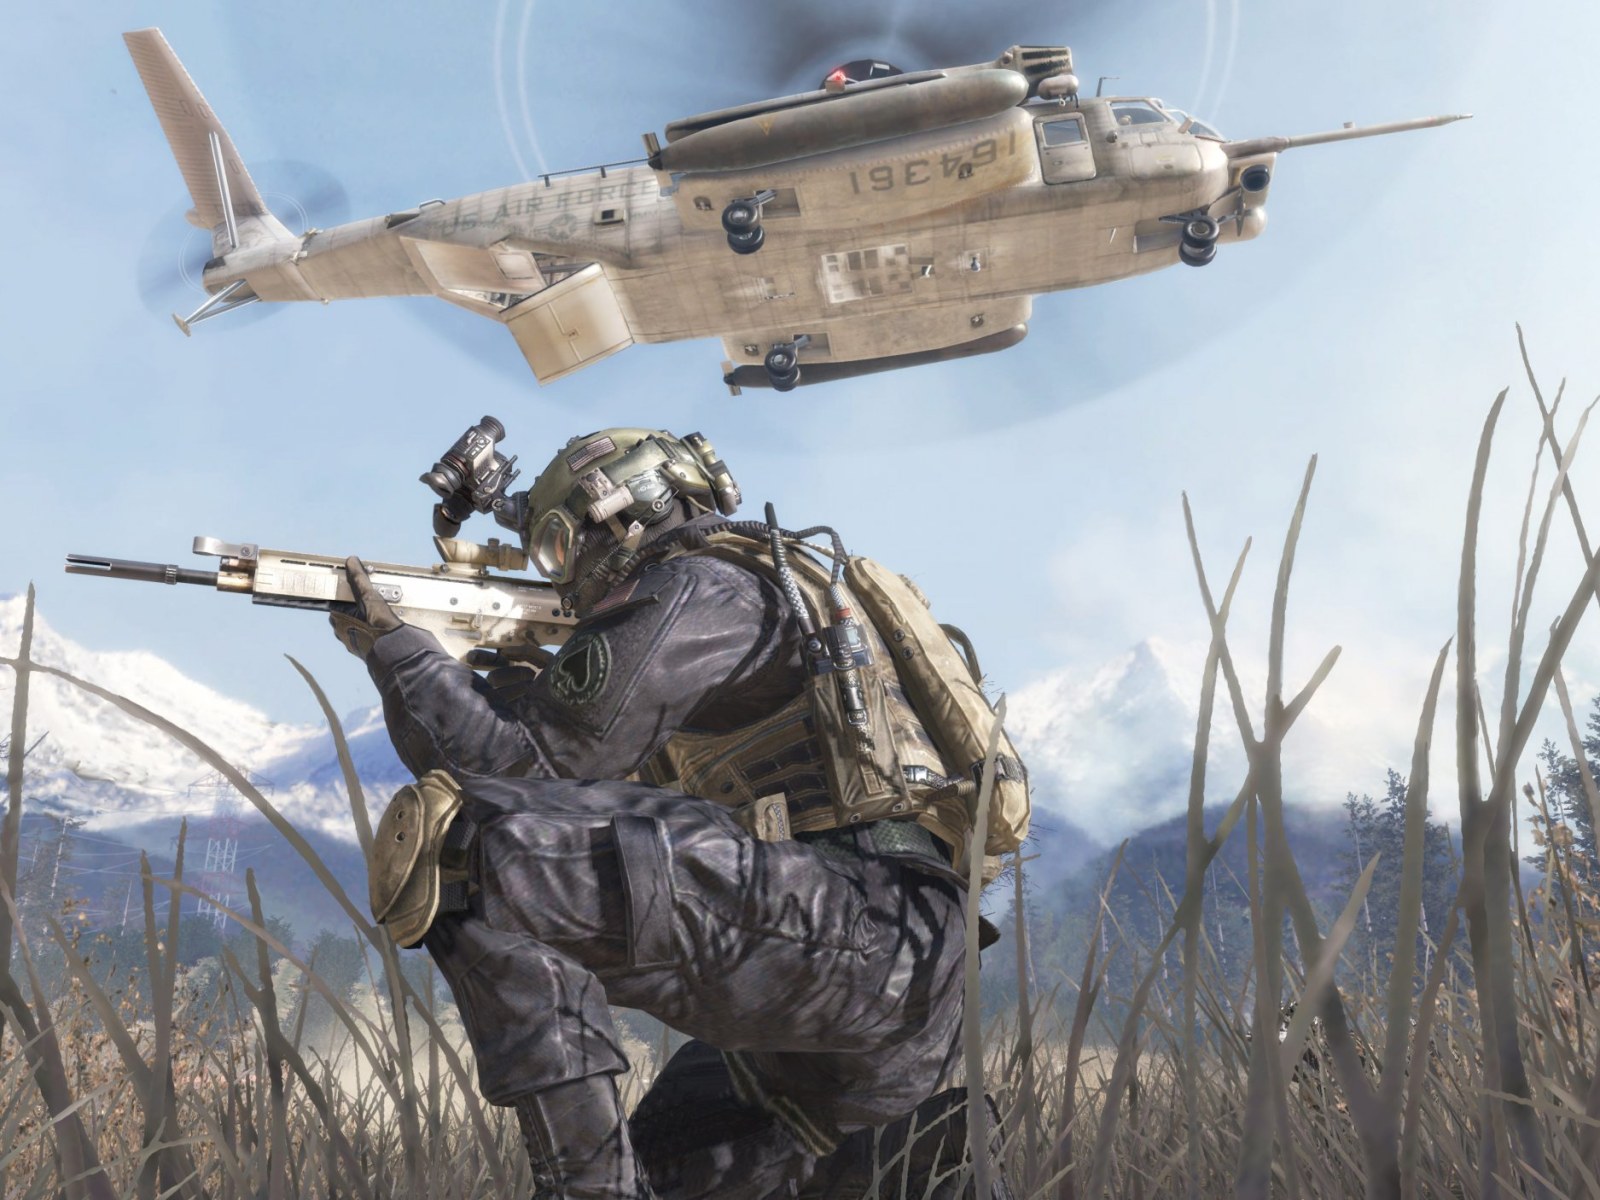 Call of Duty: Modern Warfare 2 Remastered' May Release Soon With Campaign